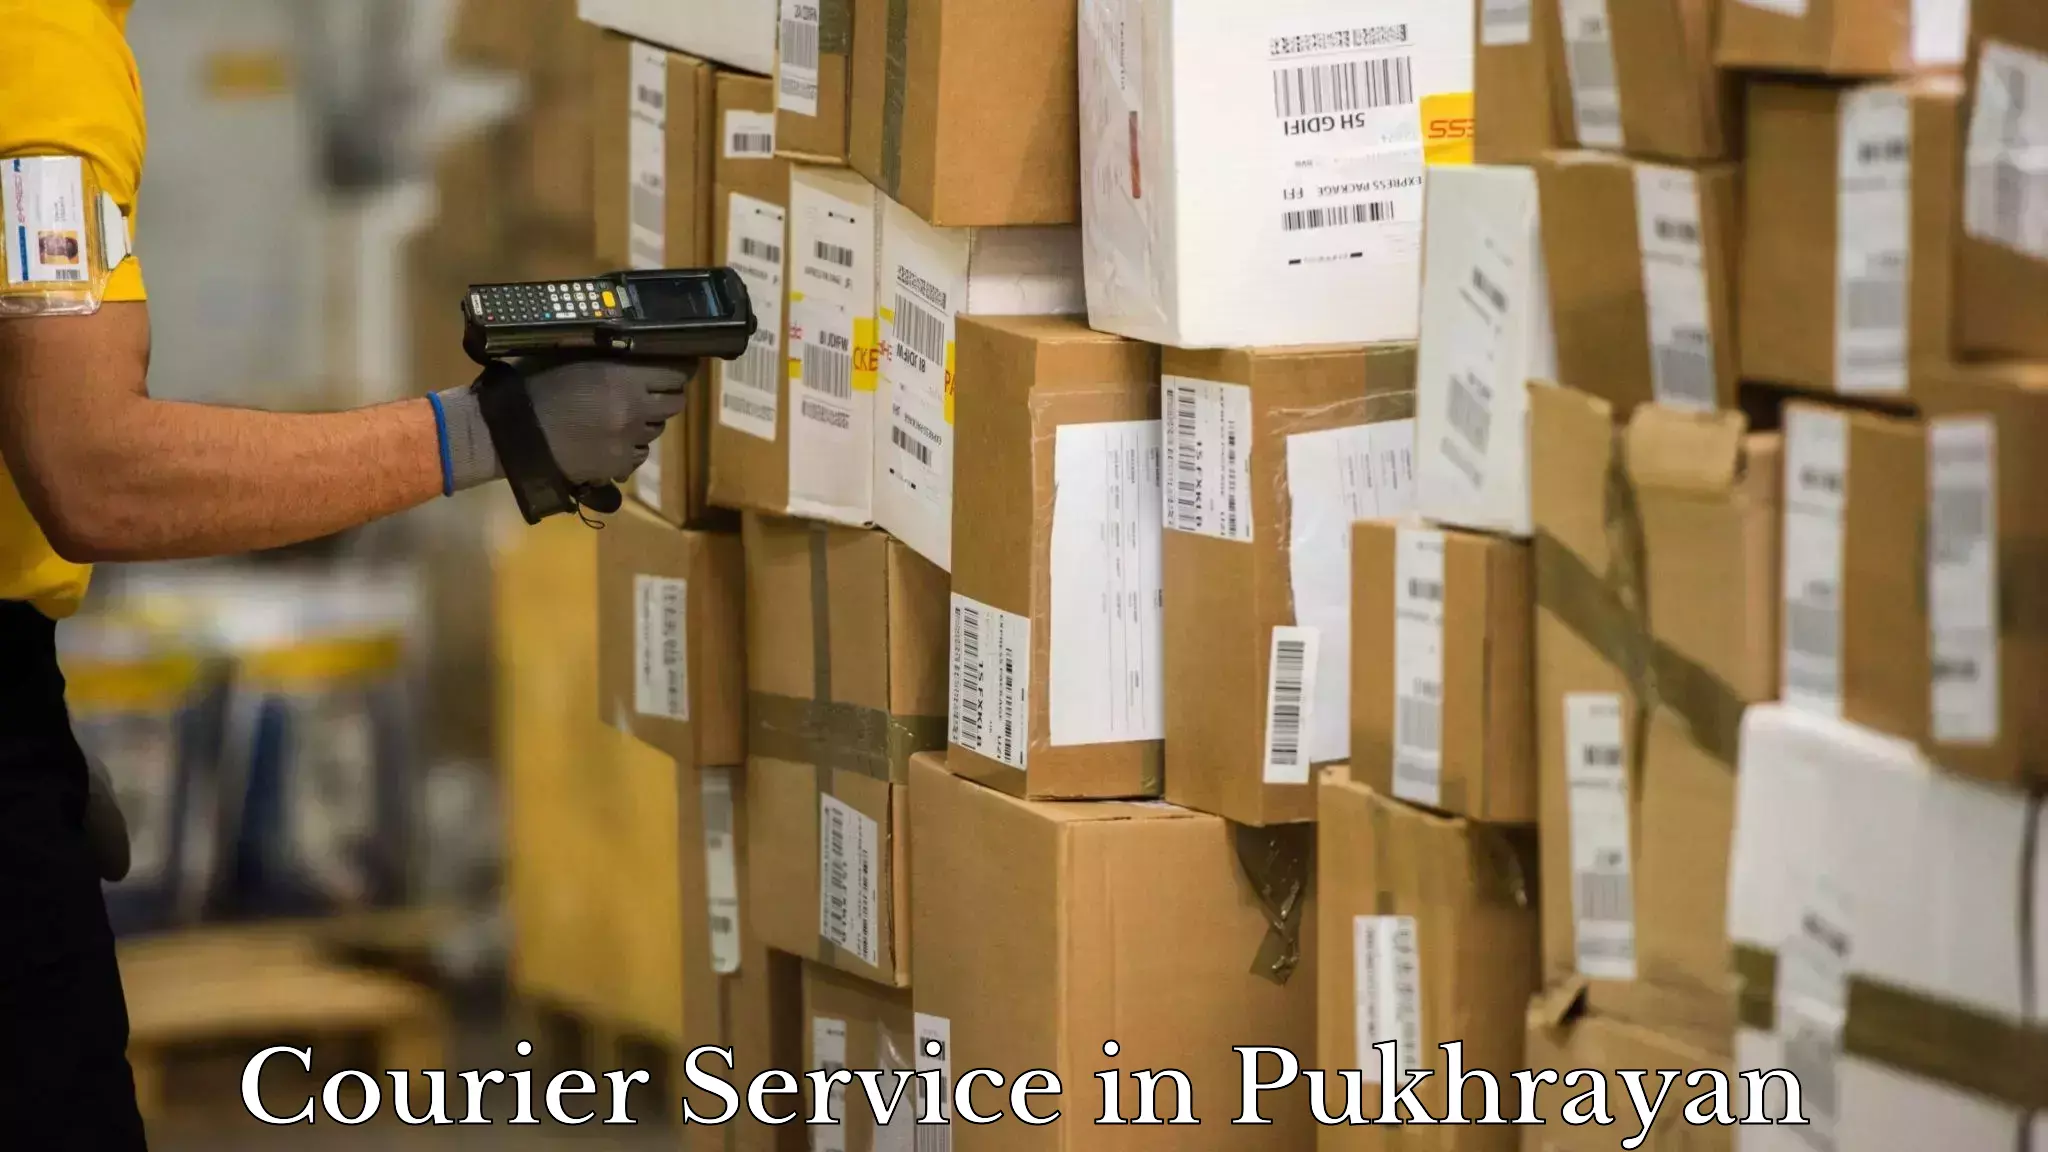 Multi-package shipping in Pukhrayan